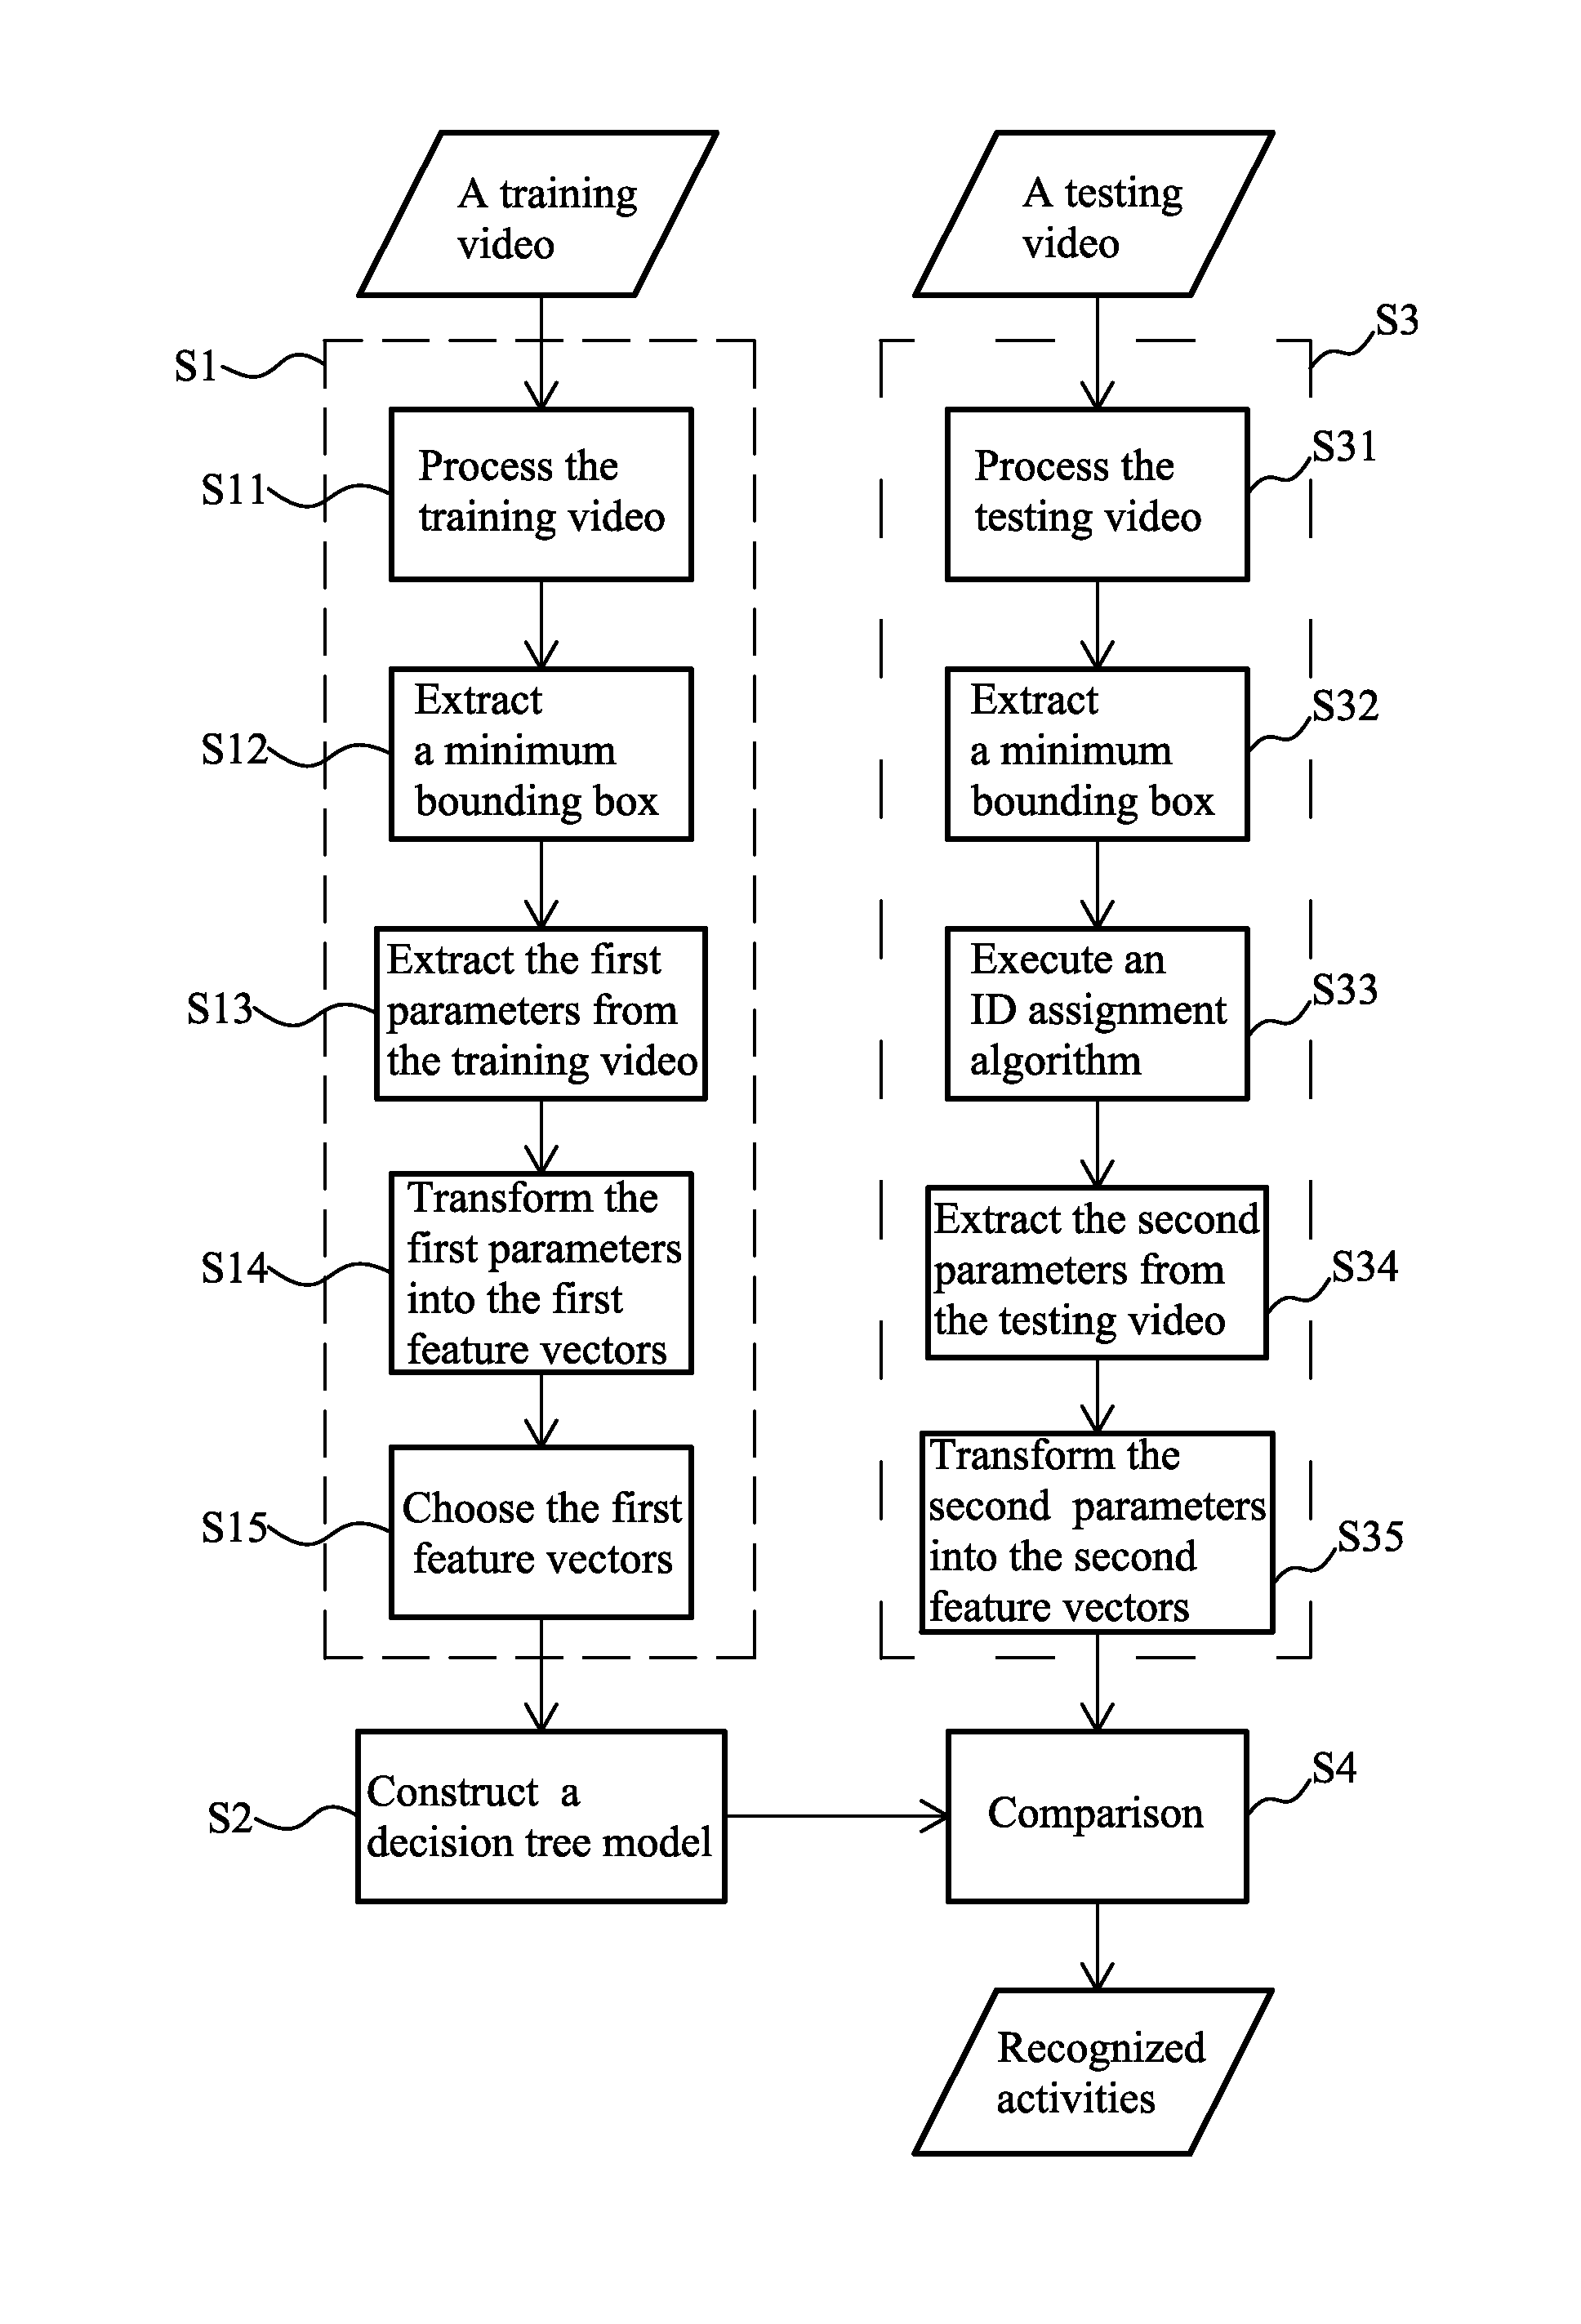 Activity recognition method